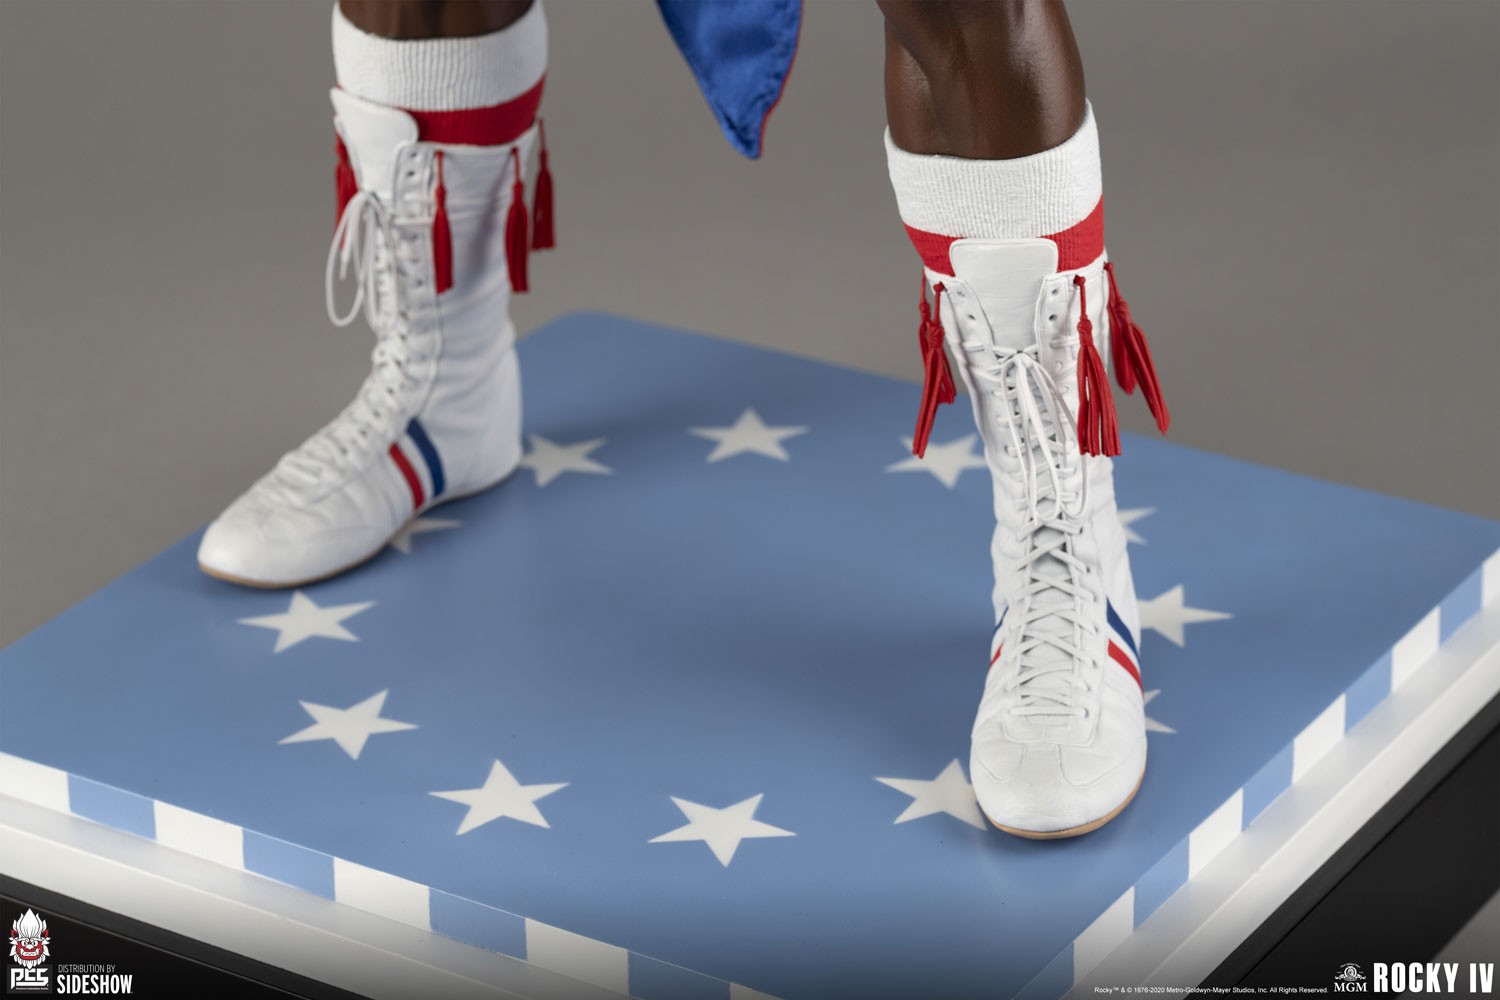 Apollo Creed: Master of Disaster